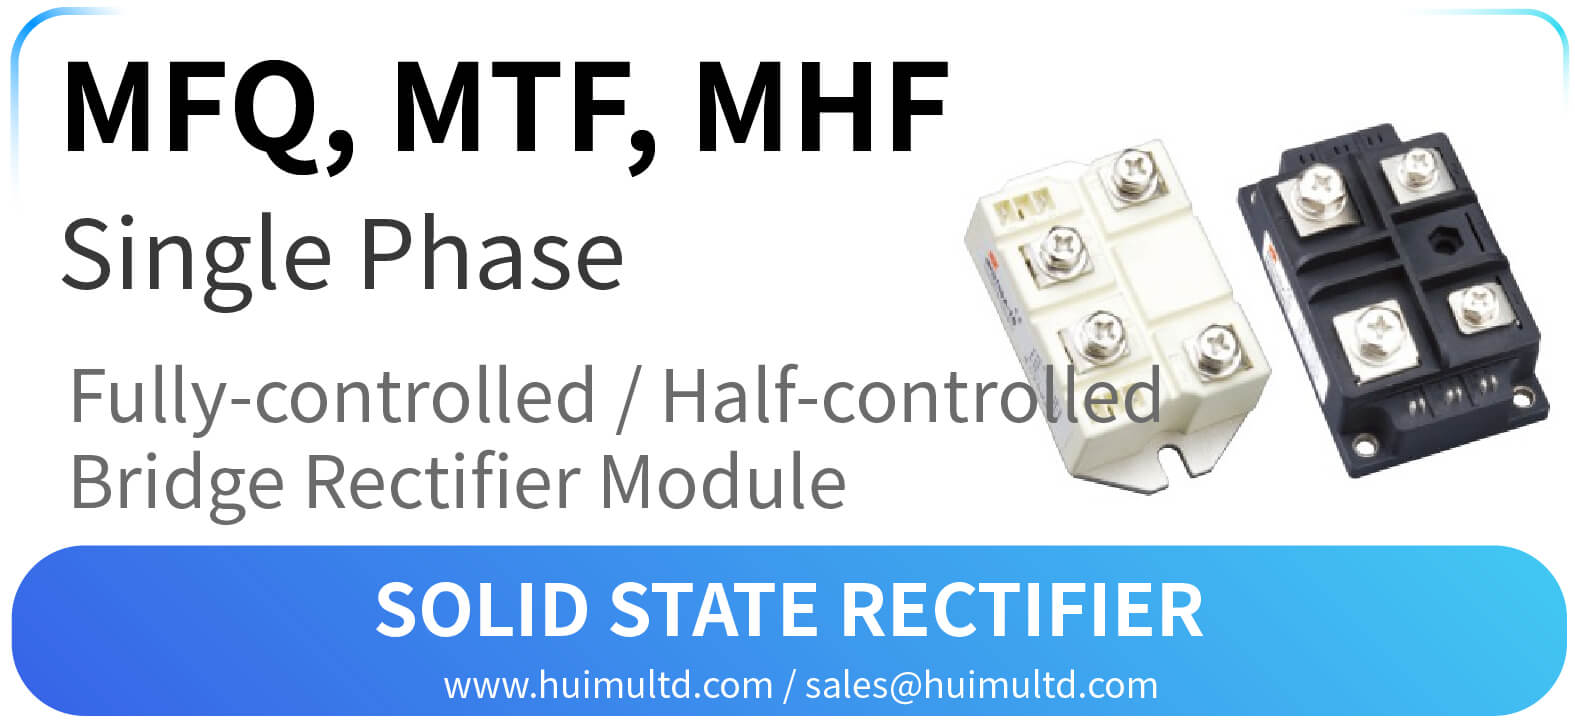 MFQ, MTF, MHF Series Solid State Rectifier